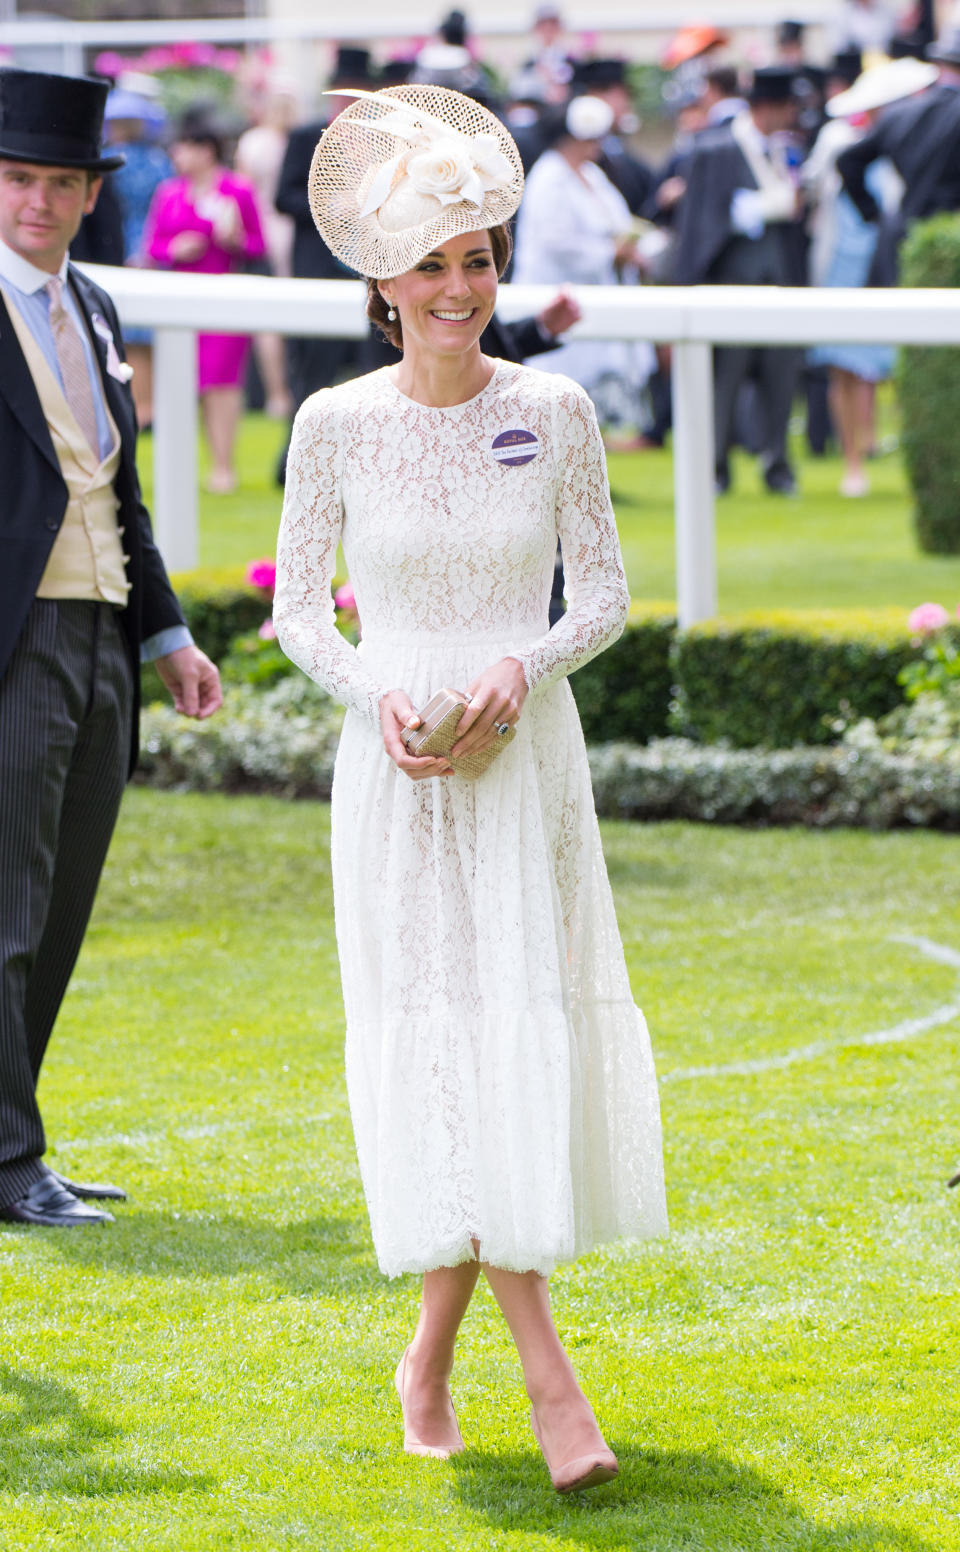 <p>For the first day of Royal Ascot 2017, the Duchess of Cambridge opted for a lace midi dress by Alexander McQueen. The look was reminiscent of a Dolce and Gabbana number she wore to the event. She teamed the dress with Gianvito Rossi heels. <em>[Photo: Getty]</em> </p>